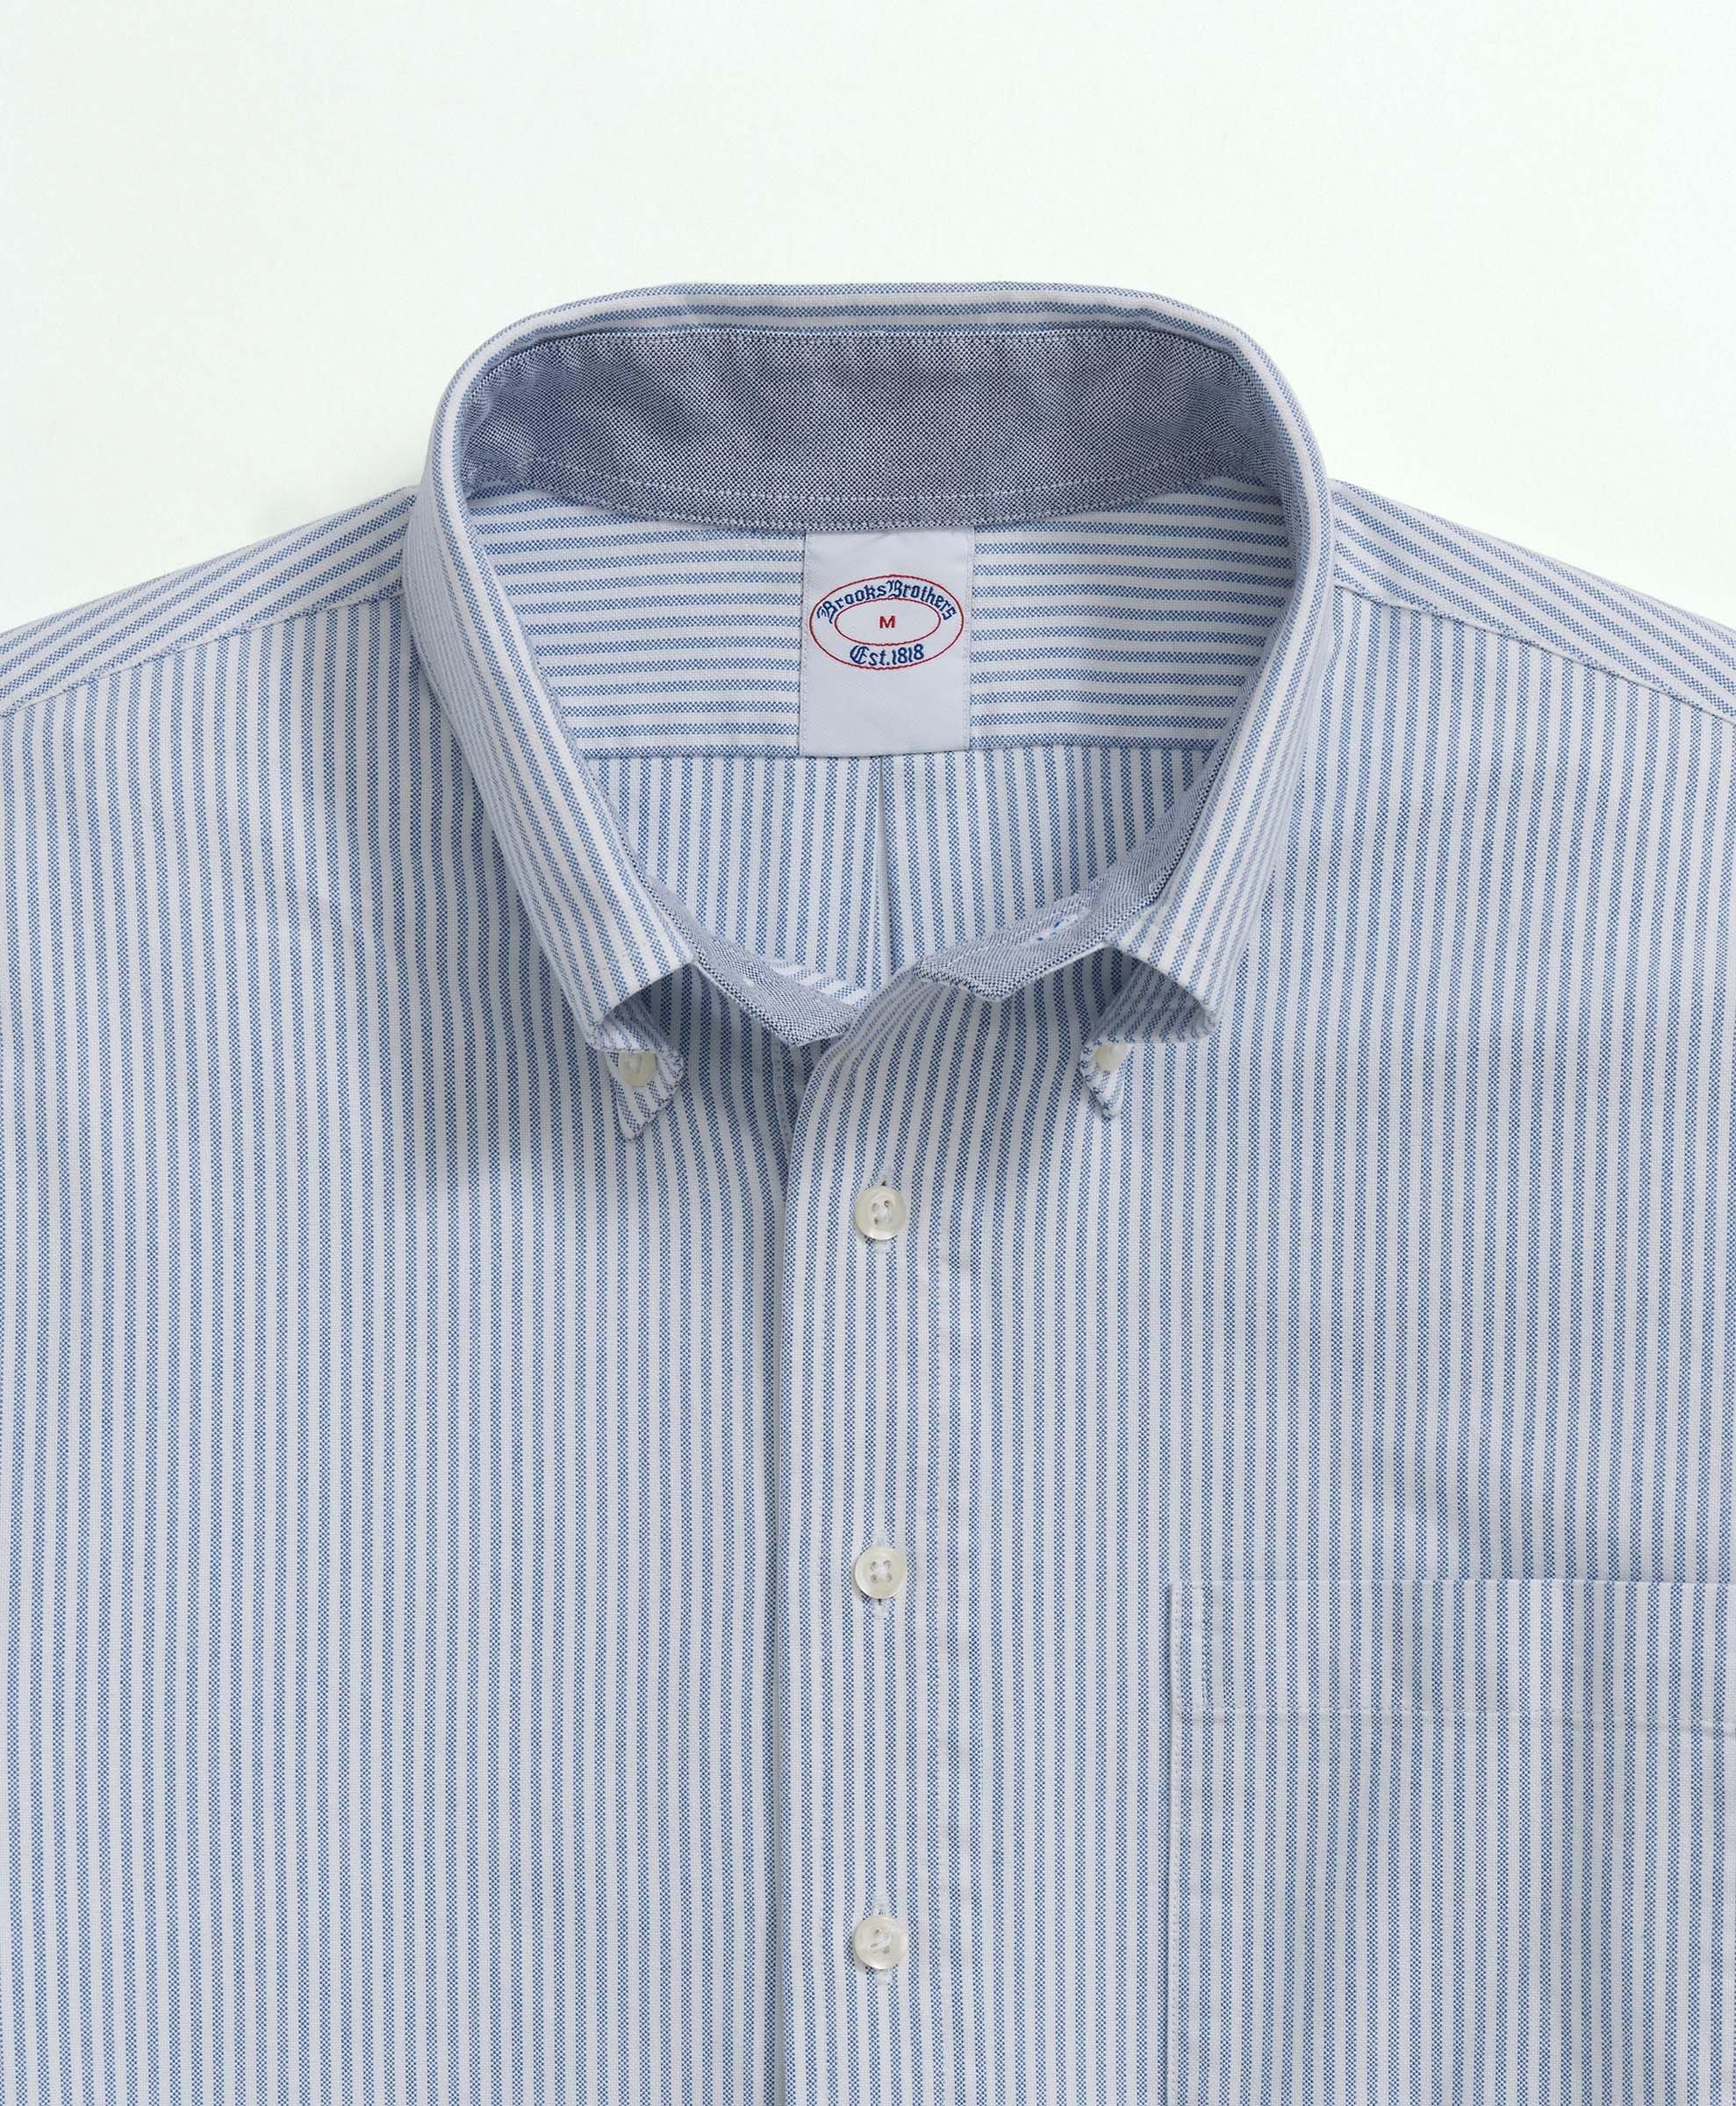 The New Friday Oxford Shirt, Striped Pop-Over